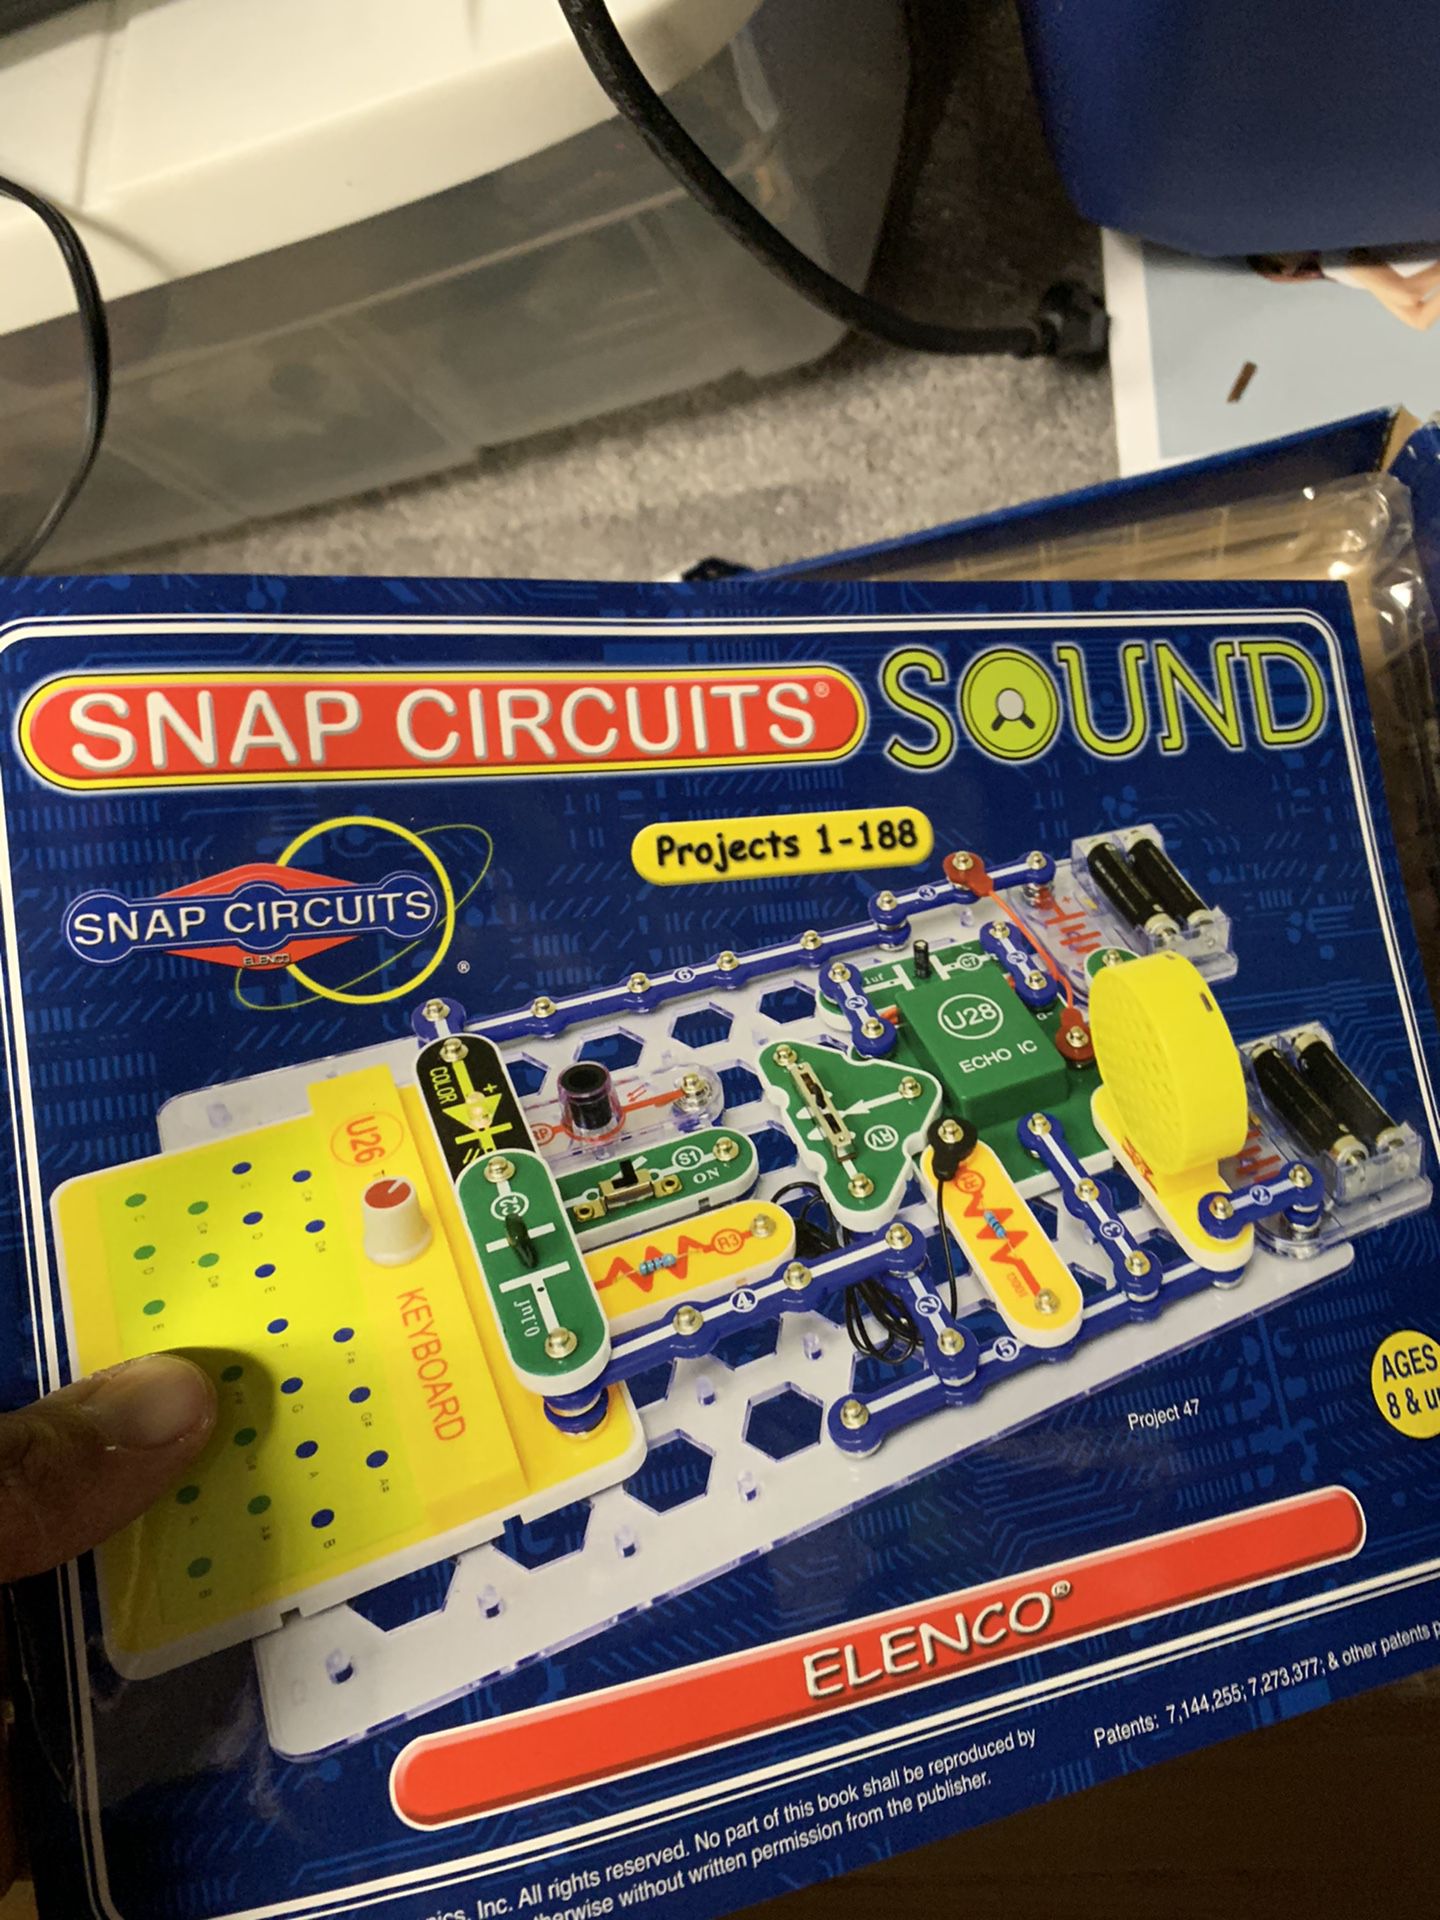 Snap cuircits kids toy